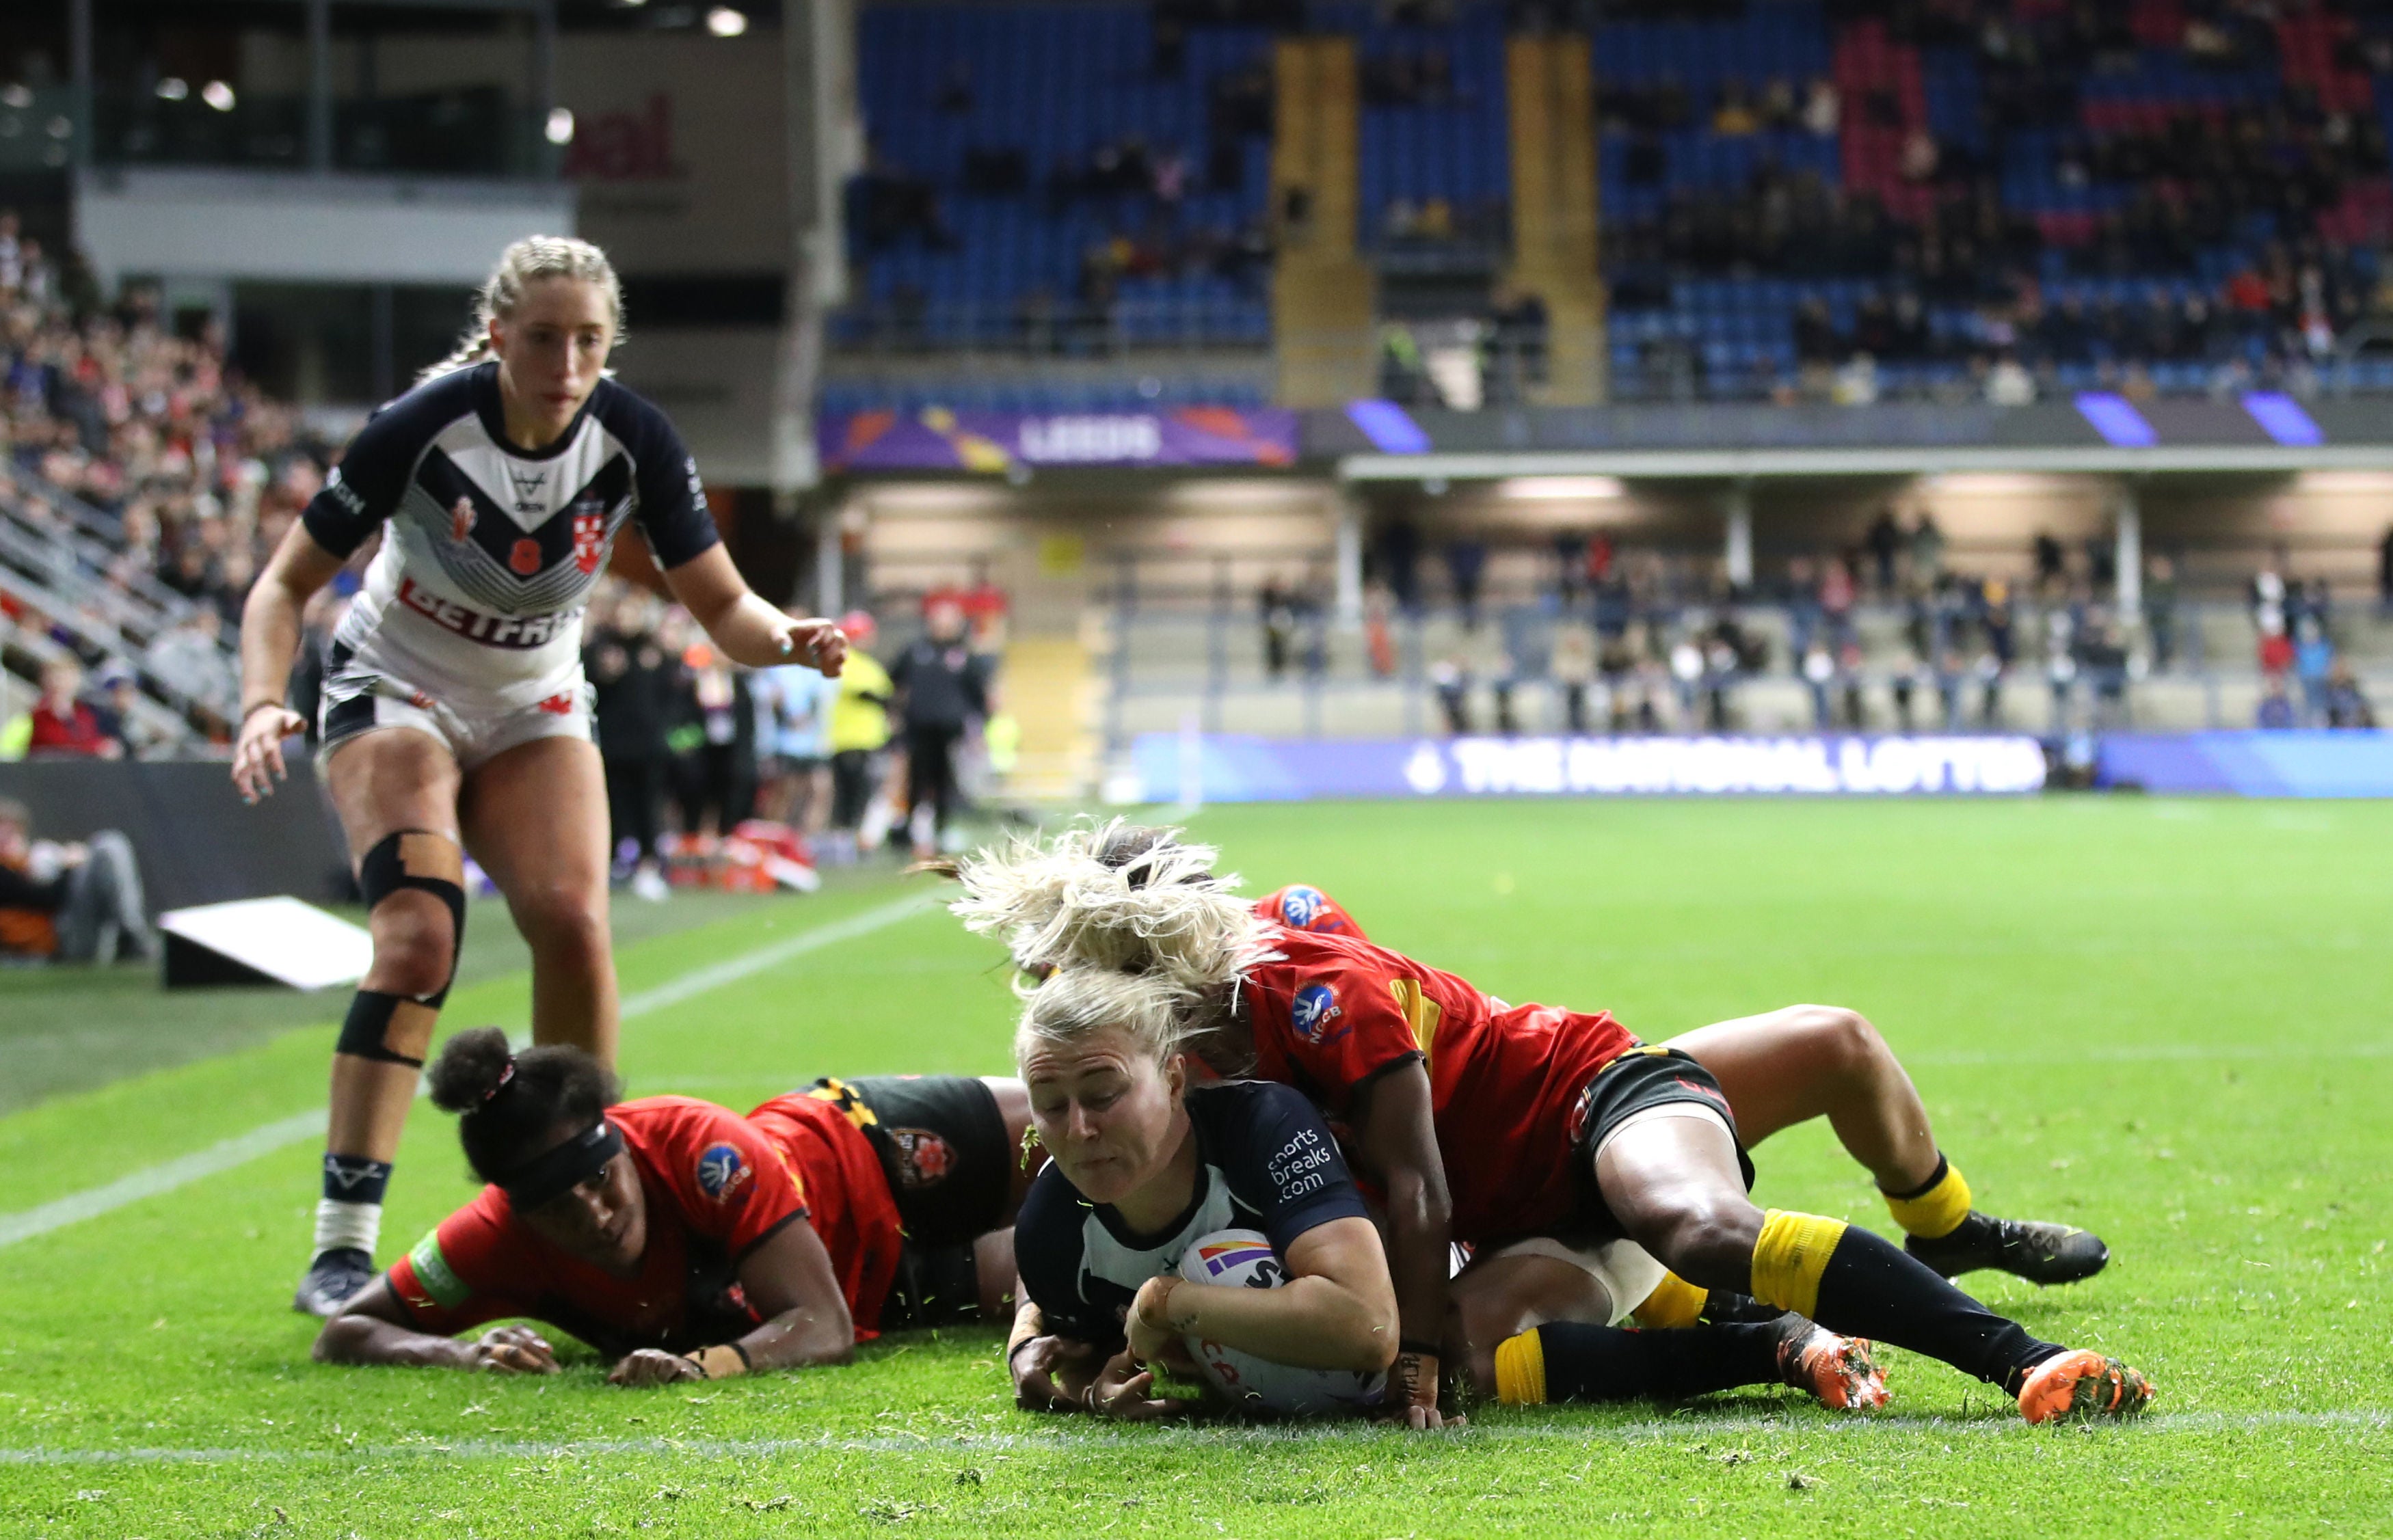 England's Tara-Jane Stanley dives in to score a try